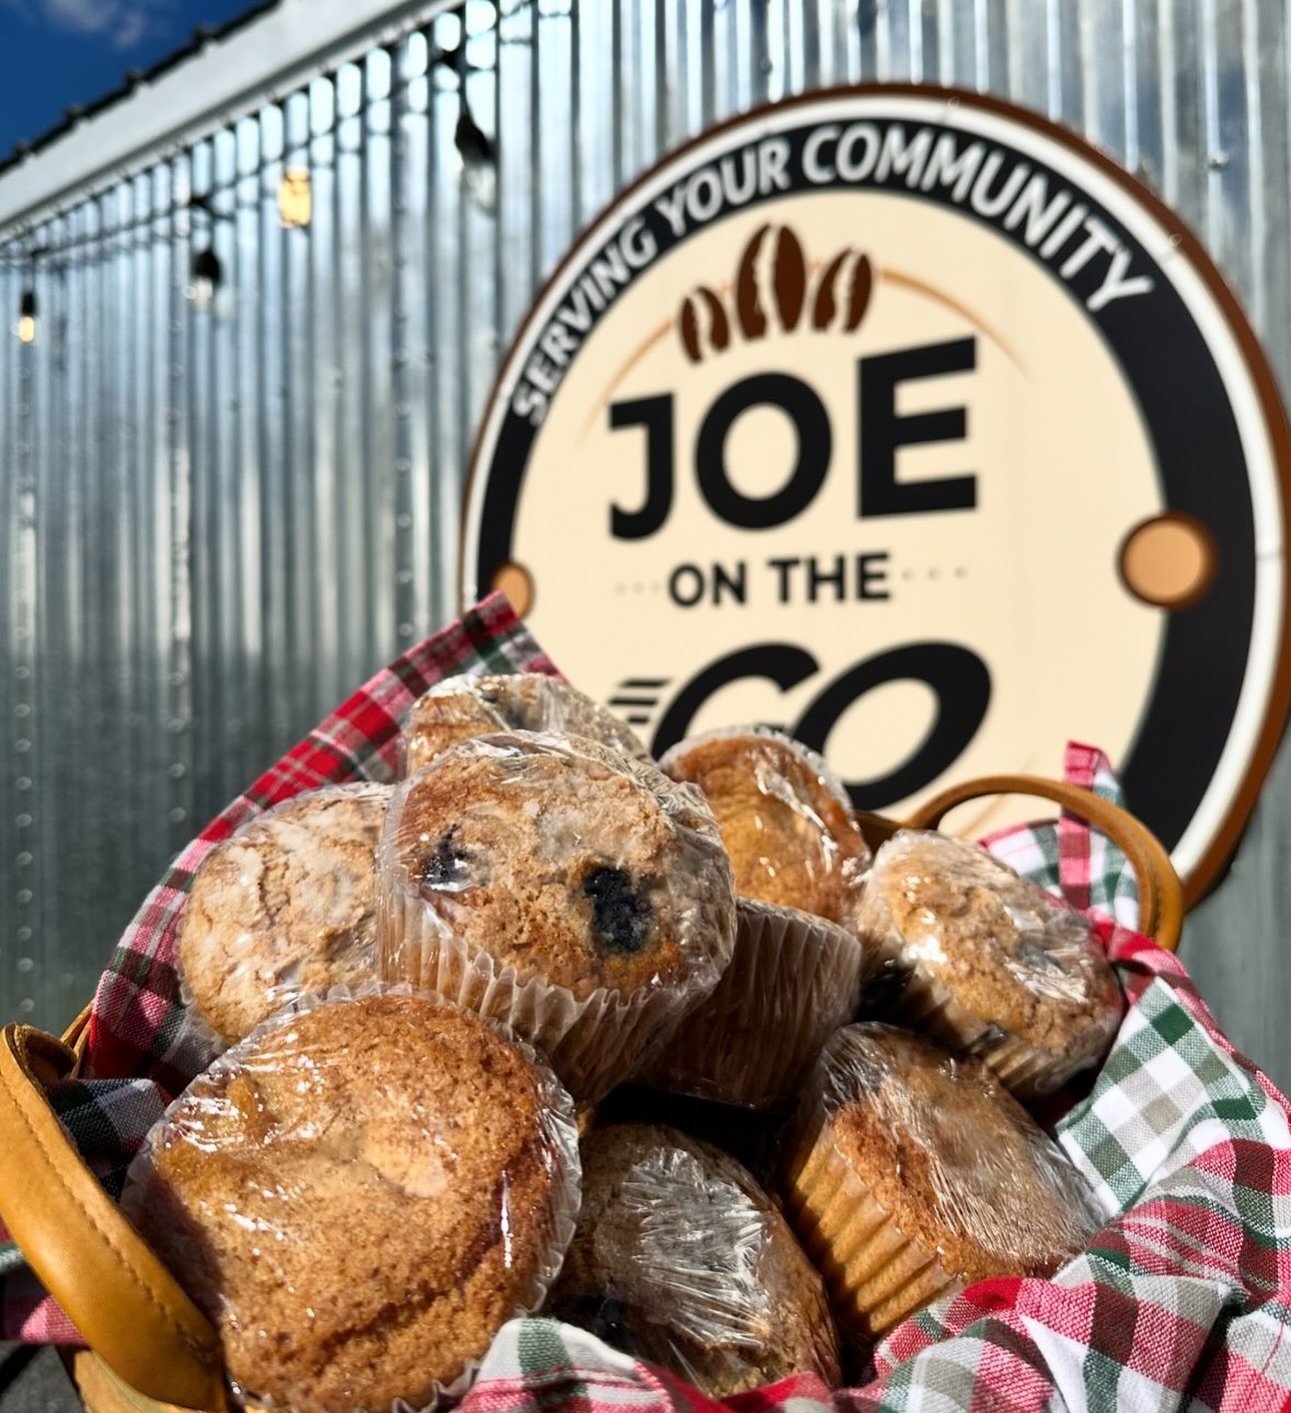 FREE Muffin Friday! 
Purchase any of our muffins and get one free on Friday, May 10 while supplies last!

#suprise #specials #joeonthegocoffeeco #bakedgoodies #servingyourcommunitybyservingyou #siplocal #cozycoffeewagon #kindnessisfree #coffeetruck